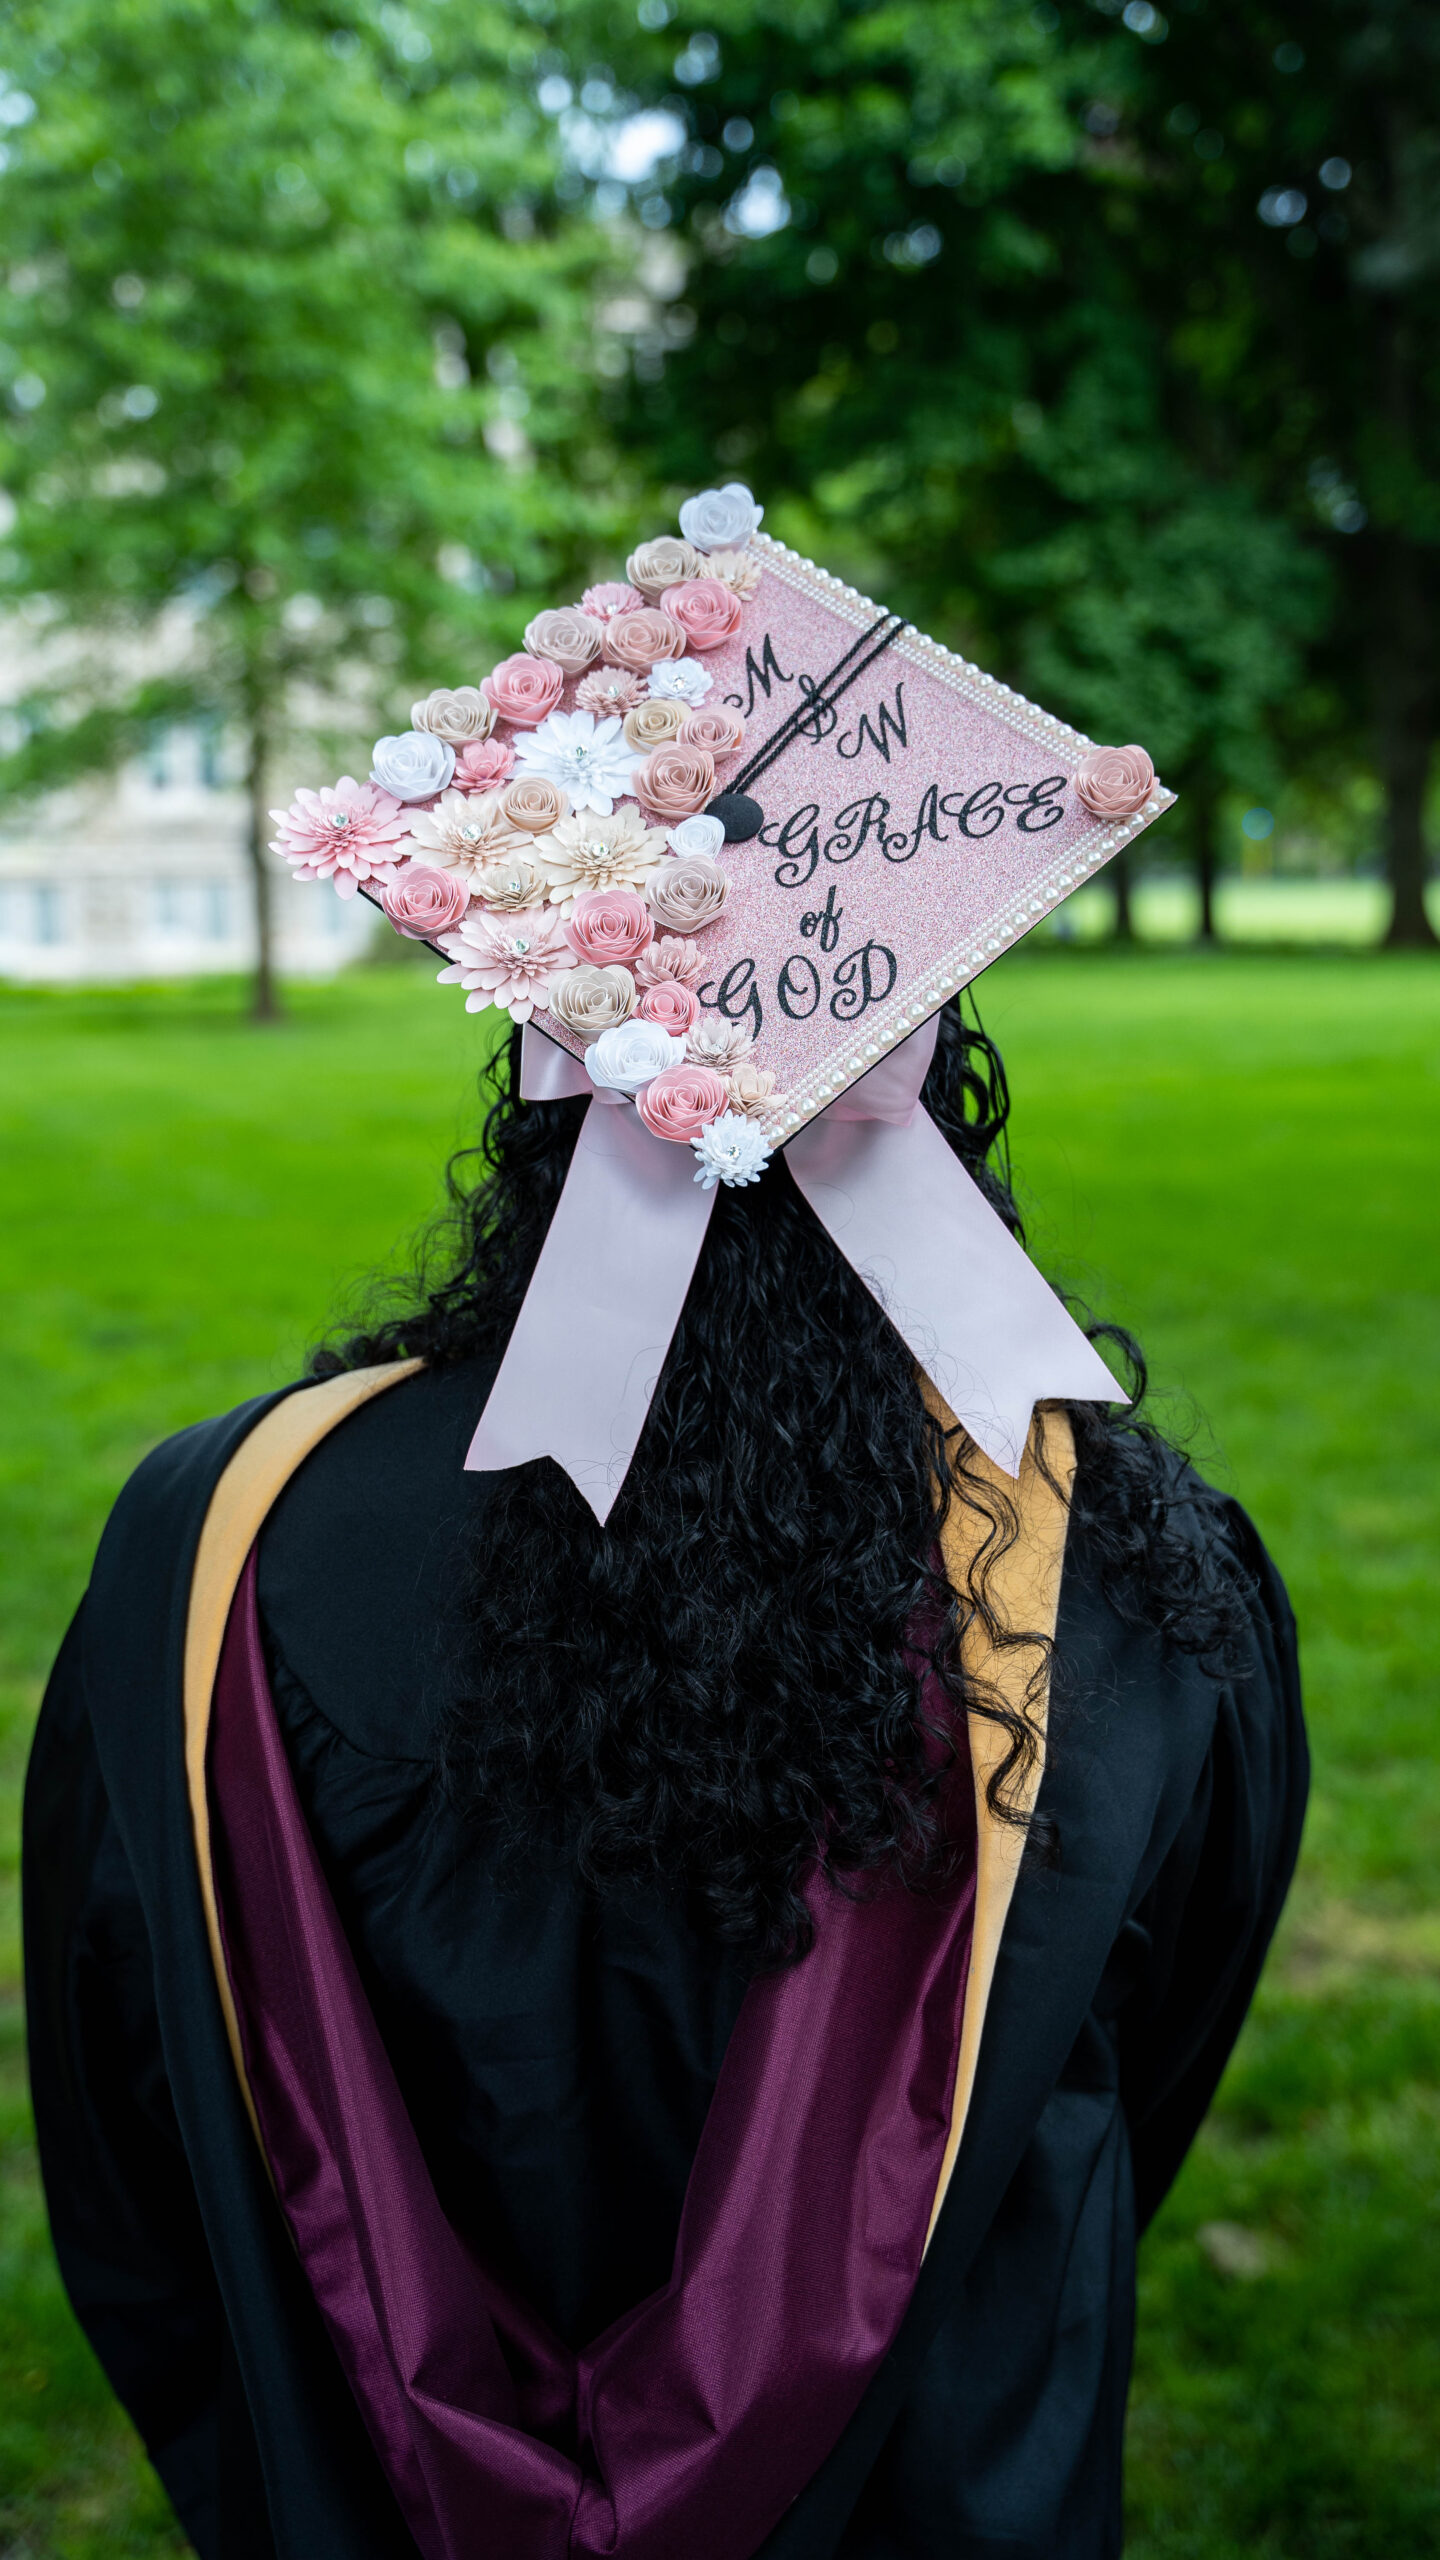 grad cap that reads "msw grace and God" with pink flowers